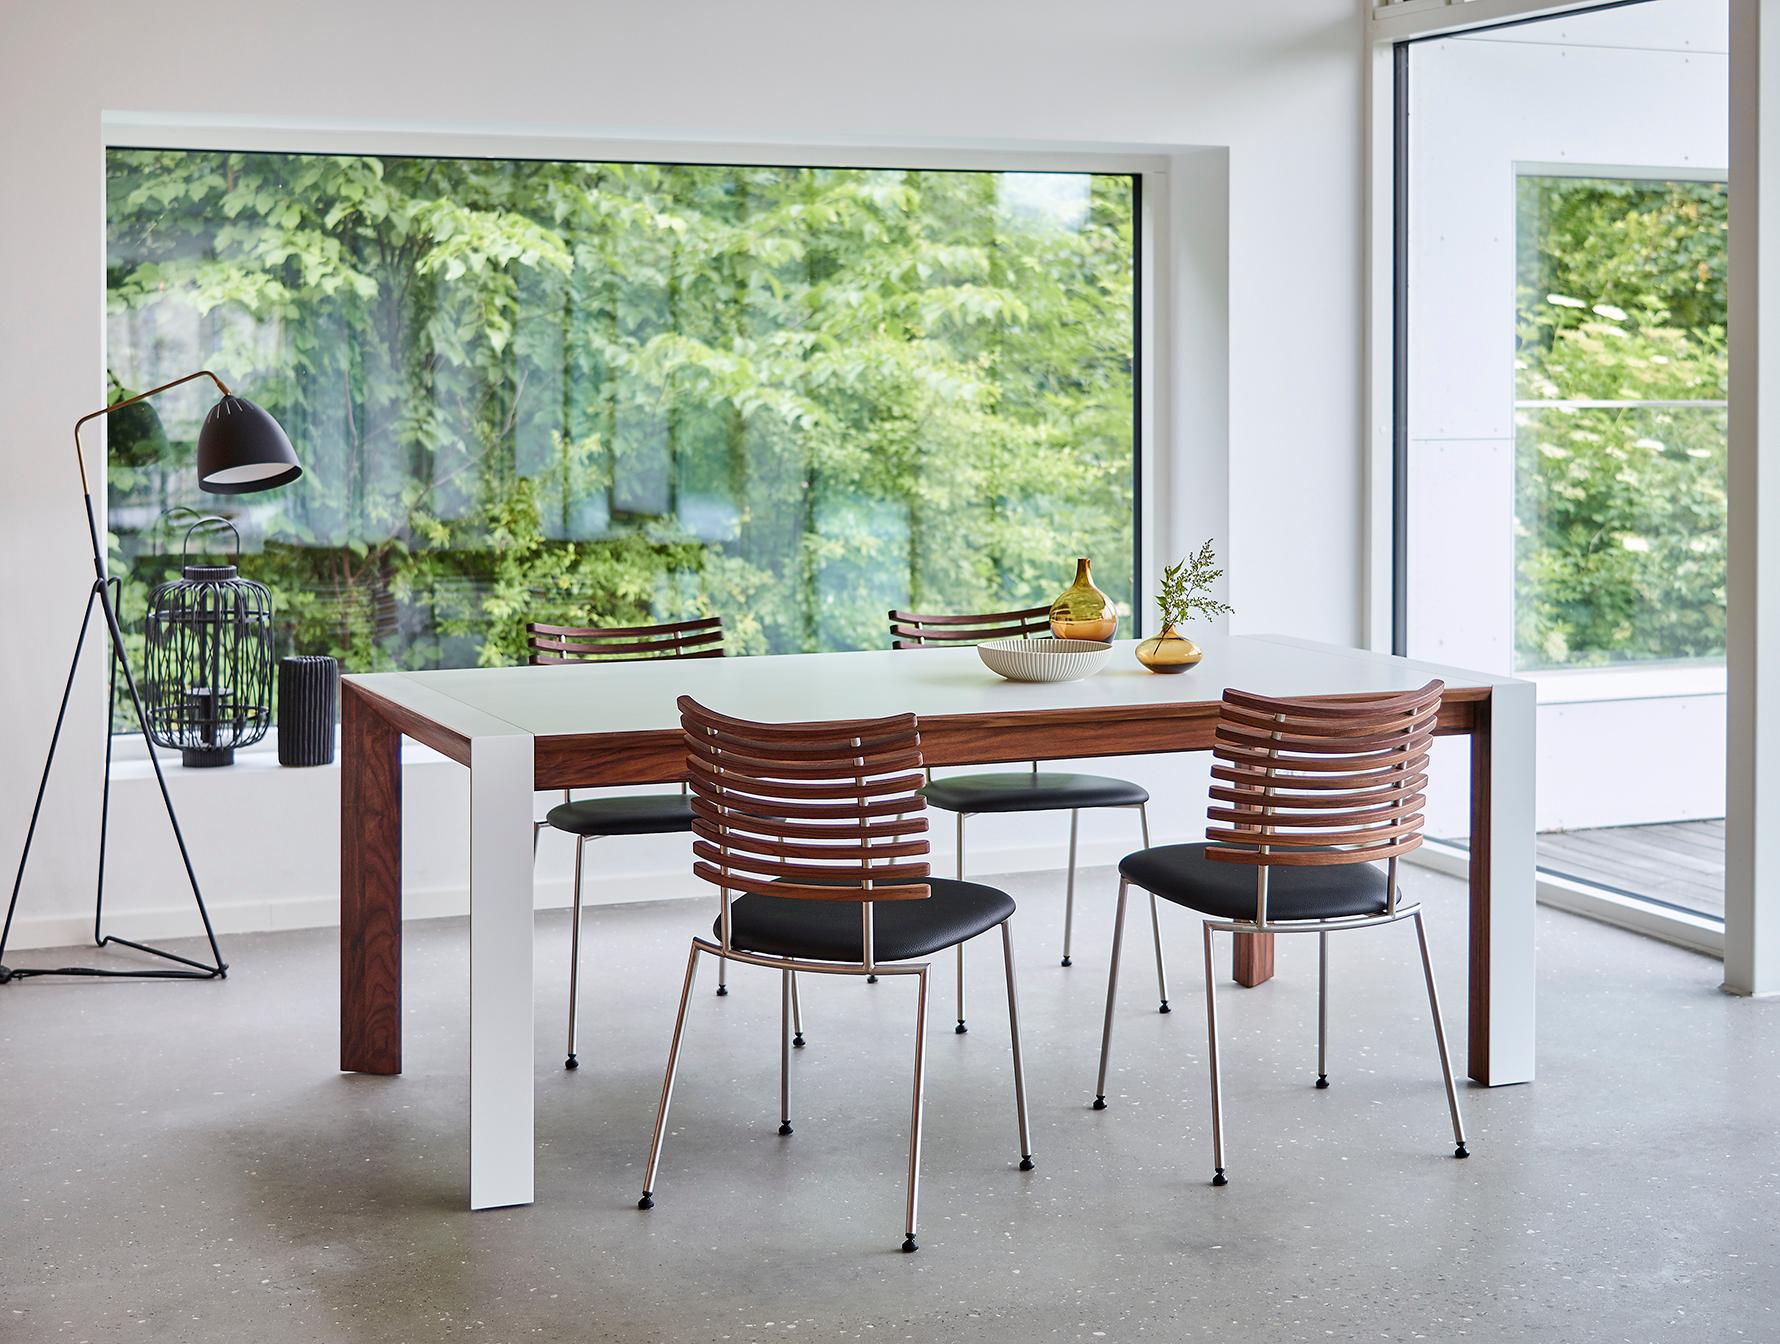 GM 7700 is an elegant table with clean lines and advanced details. The exclusive material Corian is combined with wood which forms a beautiful contrast – consistent with the Scandinavian simplicity and passion for good craftsmanship that